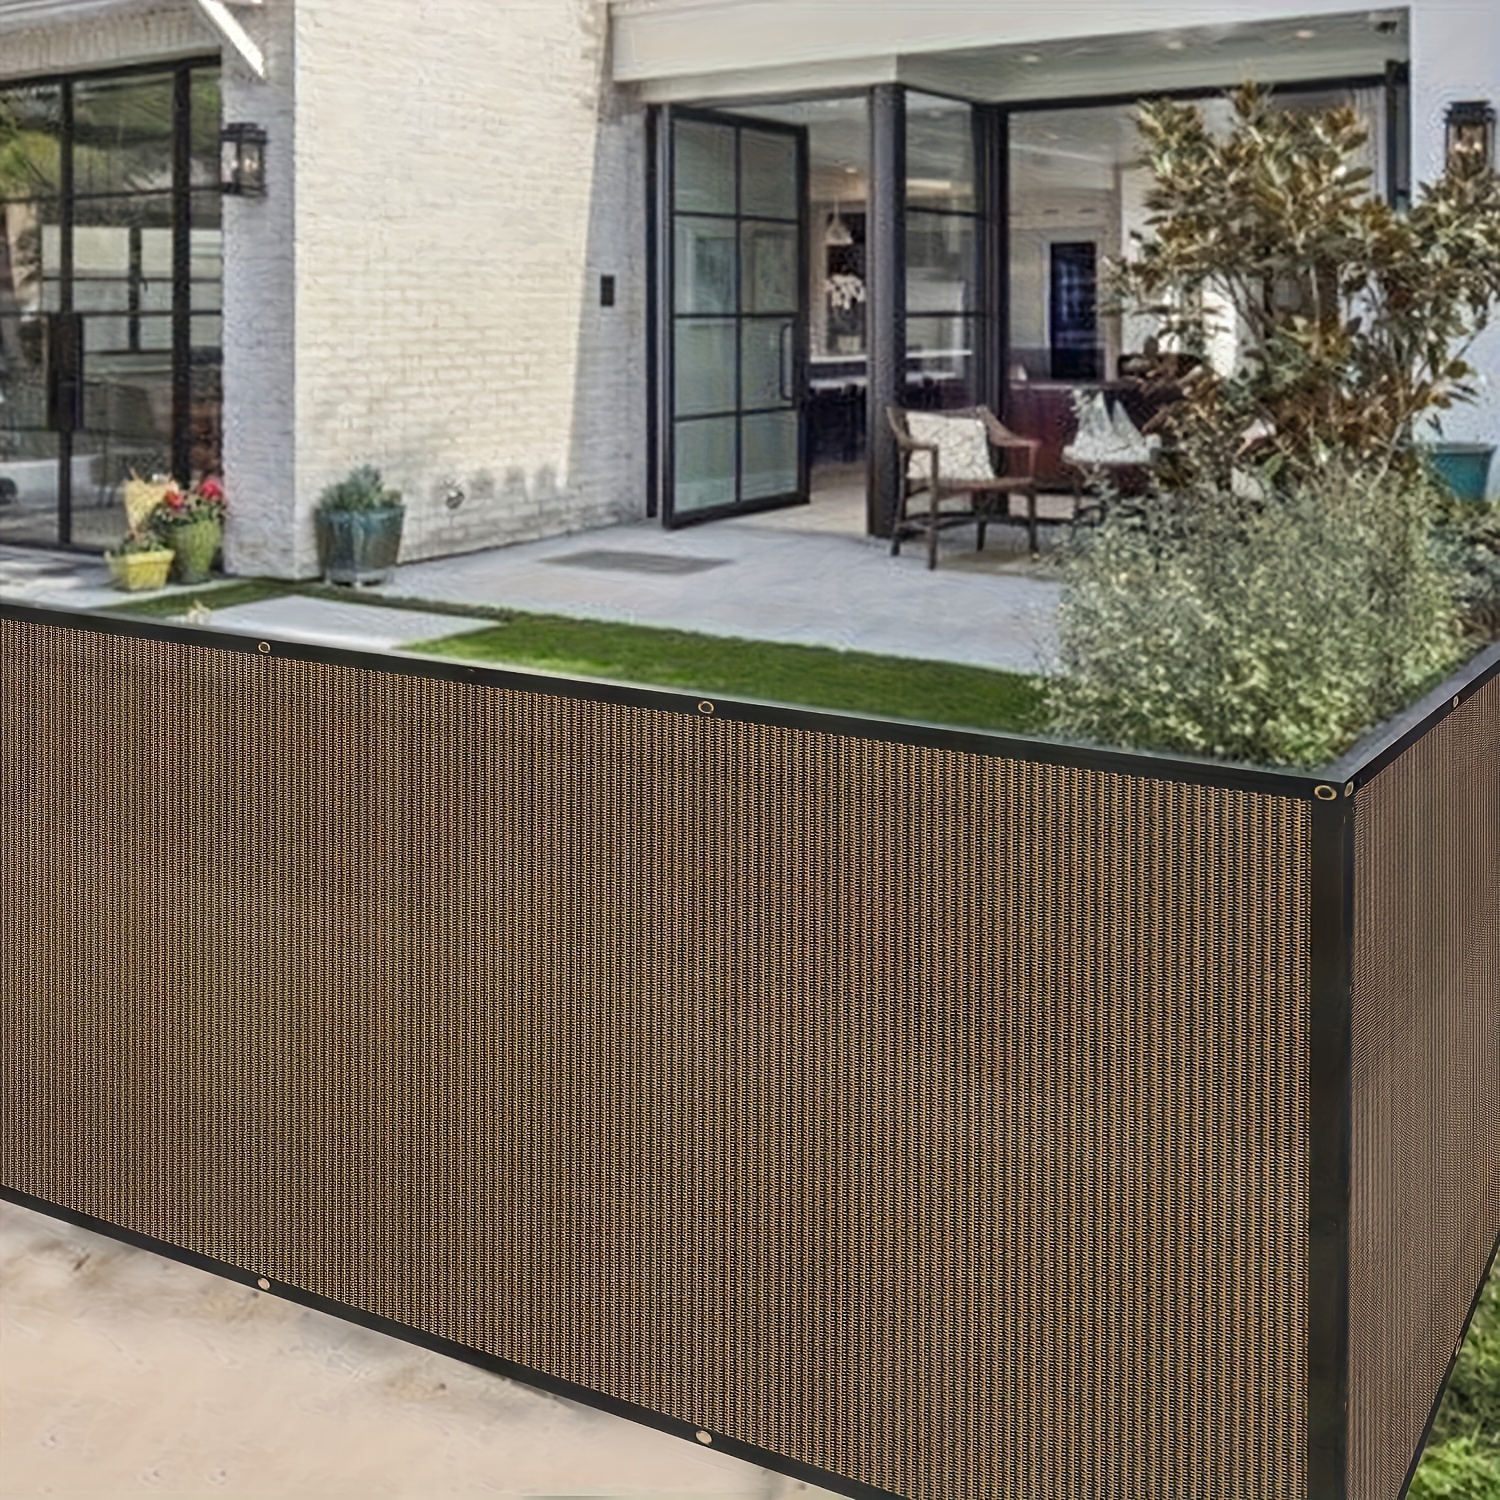 

236" X 39.4" Pvc Mesh Fabric Privacy Screen Fence Cover - 80% Uv Block Breathable Wind Protection For Outdoor Patio Lawn Garden Yard Pool Deck Balcony